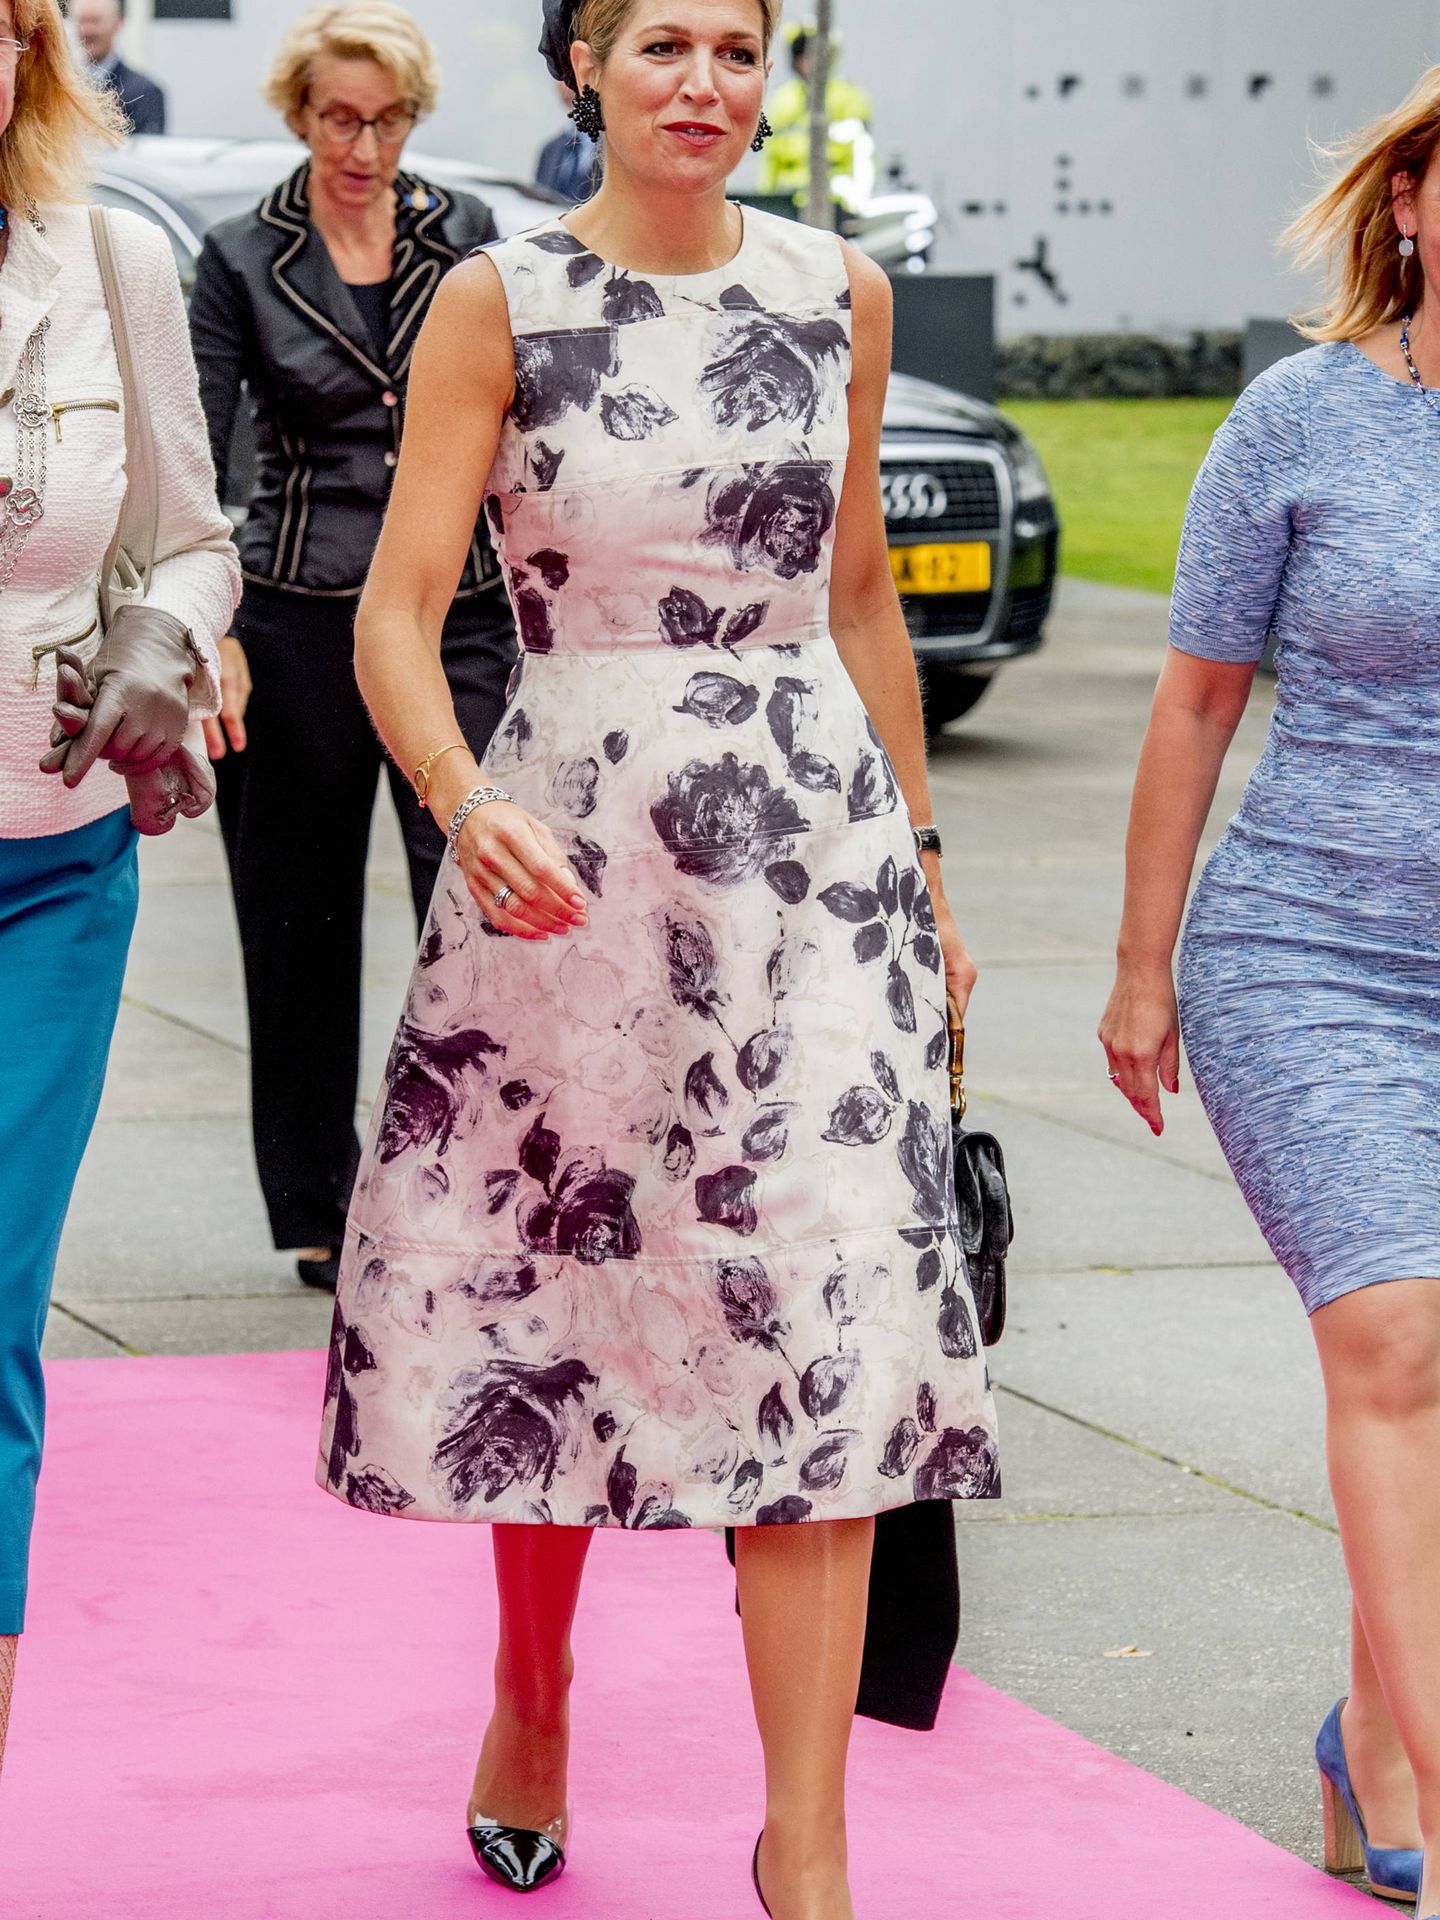 THE HAGUE - Queen Maxima is present at the congress World of Health Care in the Fokker Terminal in The Hague on Thursday 28 September. During this meeting, improving global health care is central.